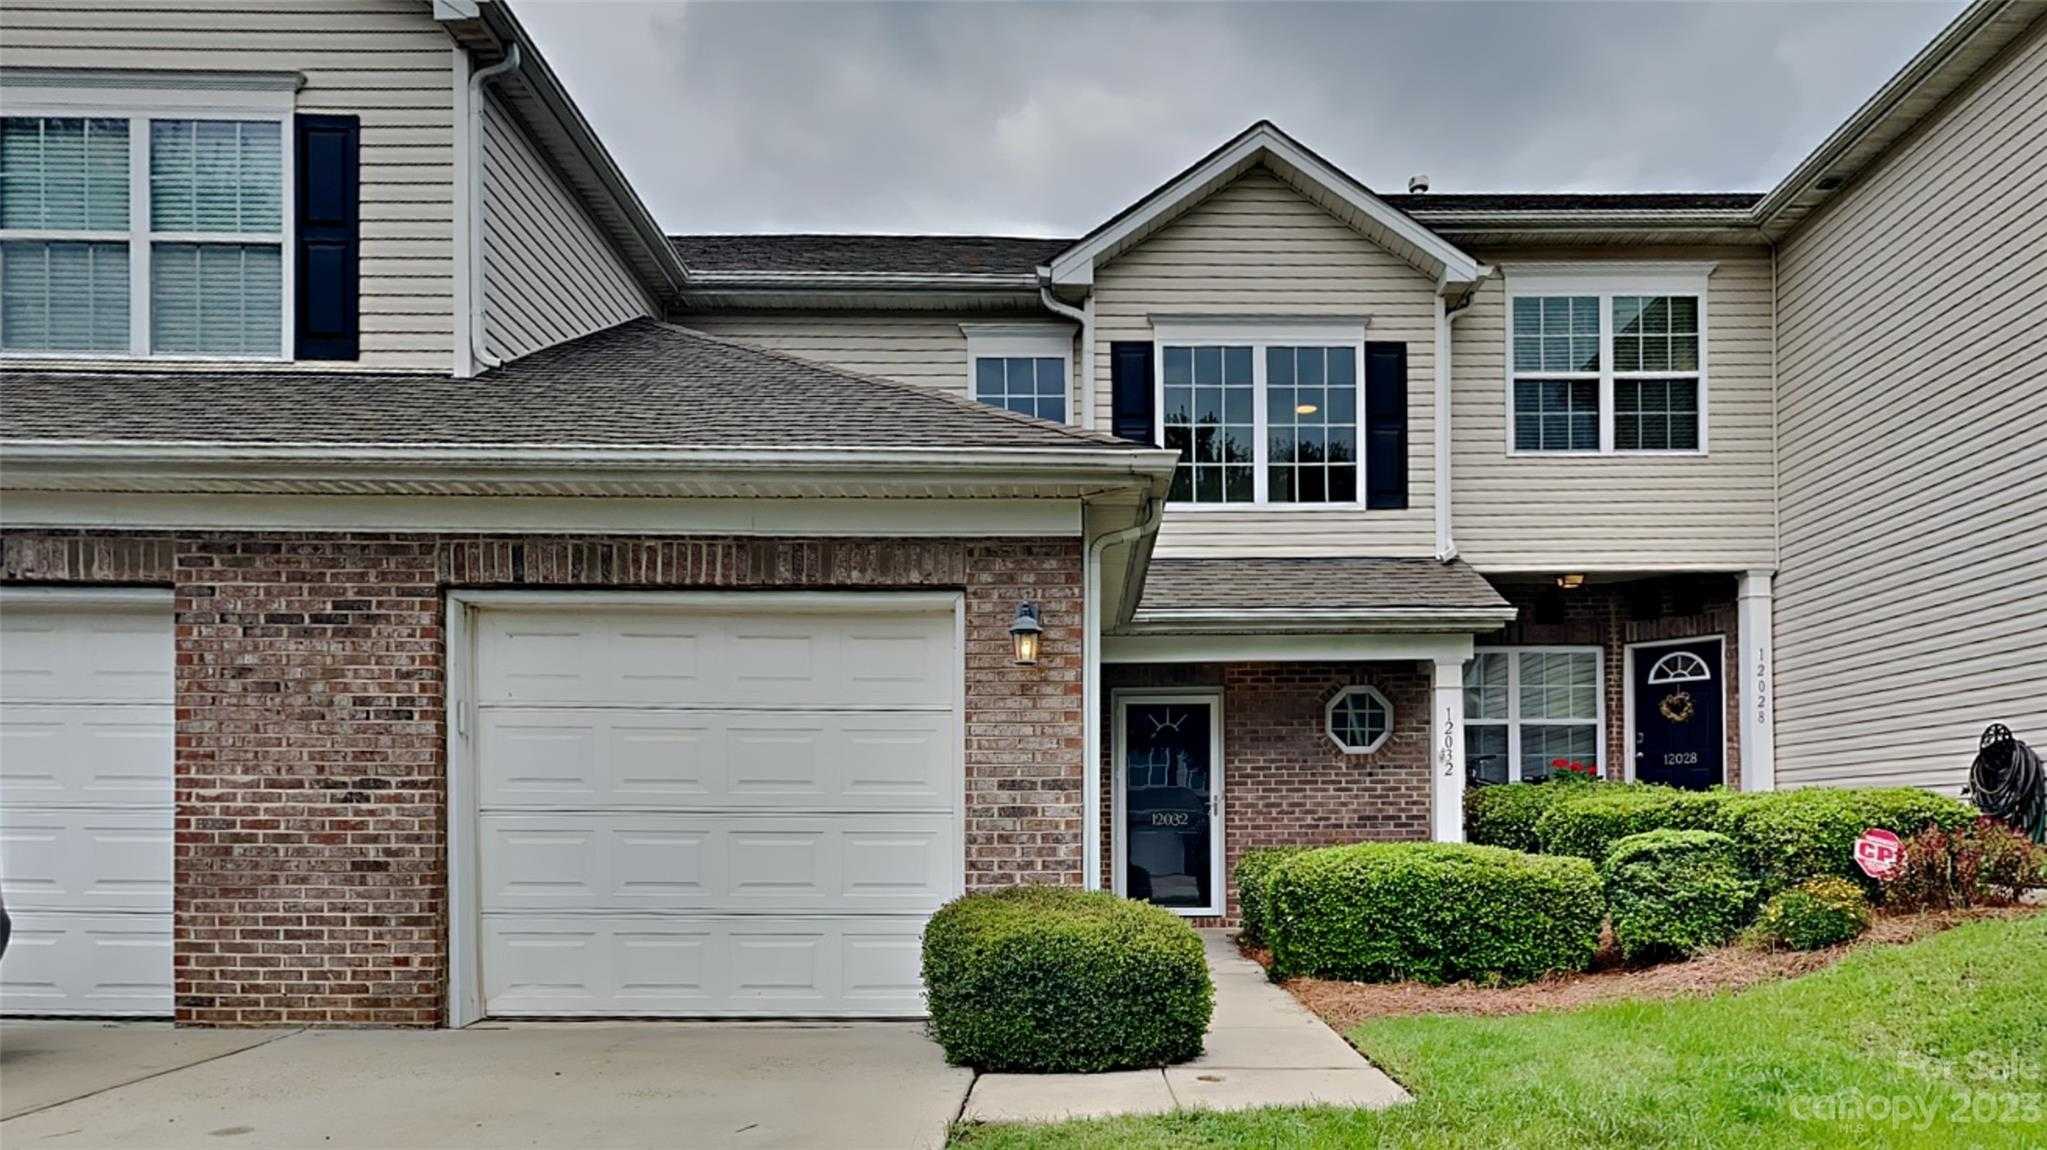 View Pineville, NC 28134 townhome